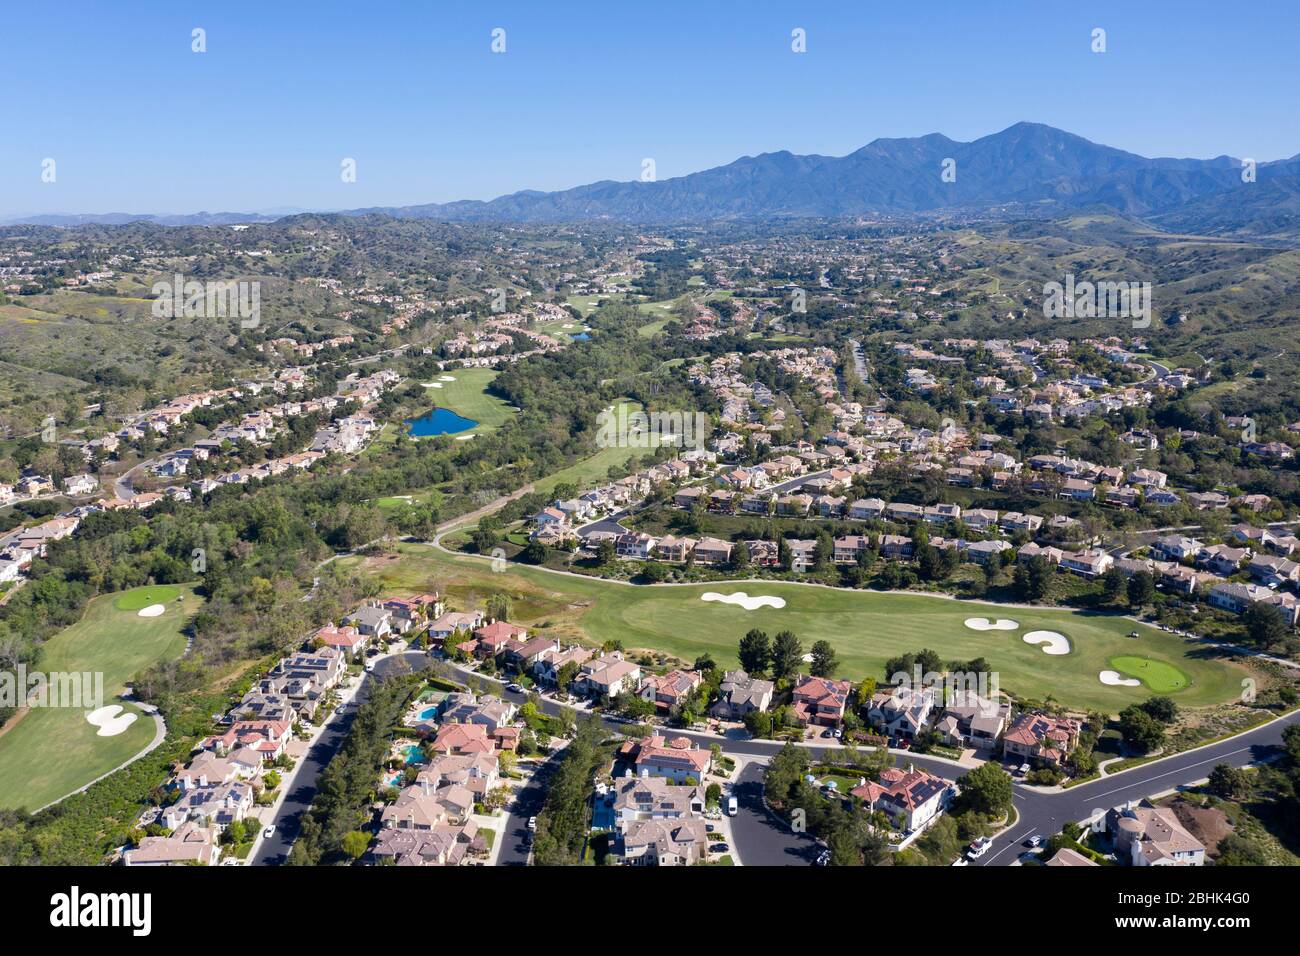 Aerial view above Coto De Caza gated community in the foothills of Orange County, California with Santiago Peak in the distance Stock Photo